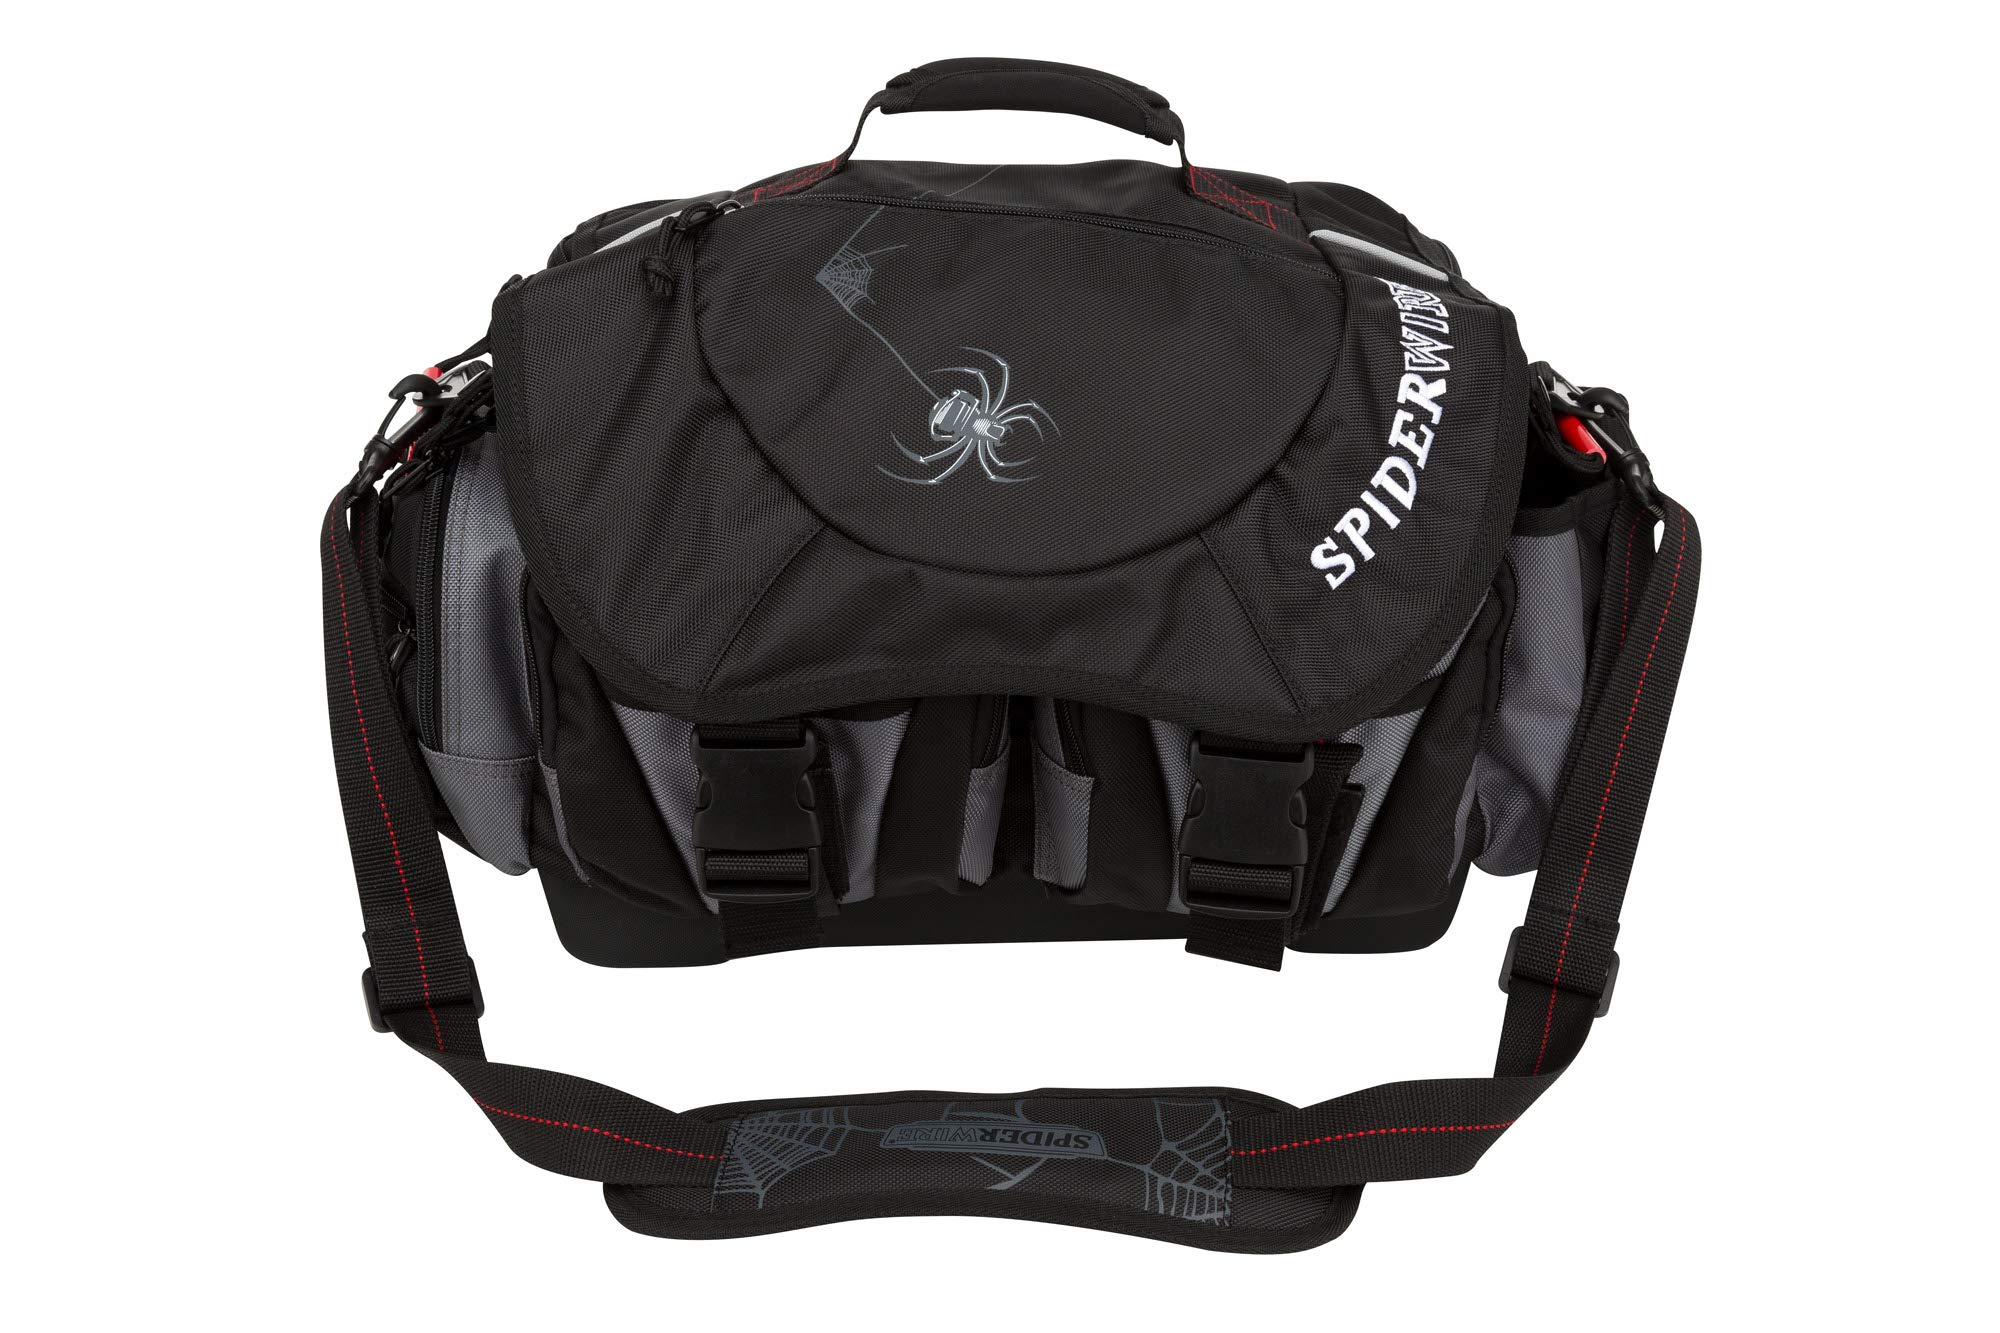 Ozark Trail Soft-sided 350 Fishing Tackle Bag with 3 Tackle Boxes